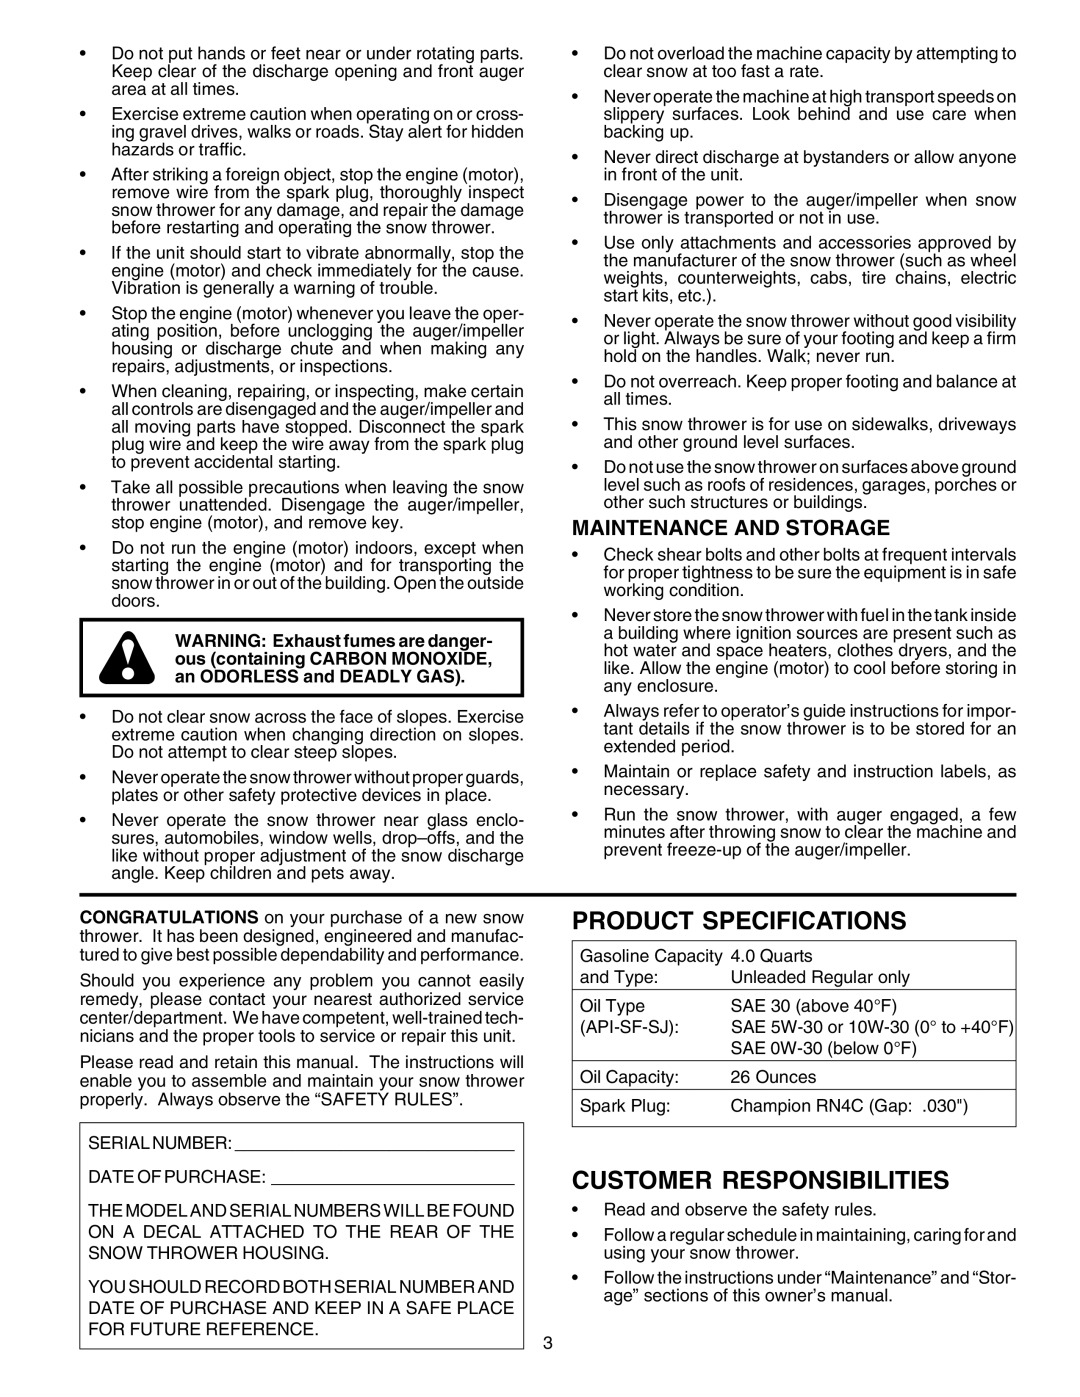 Husqvarna 8024ST owner manual Product Specifications, Customer Responsibilities, Maintenance And Storage 